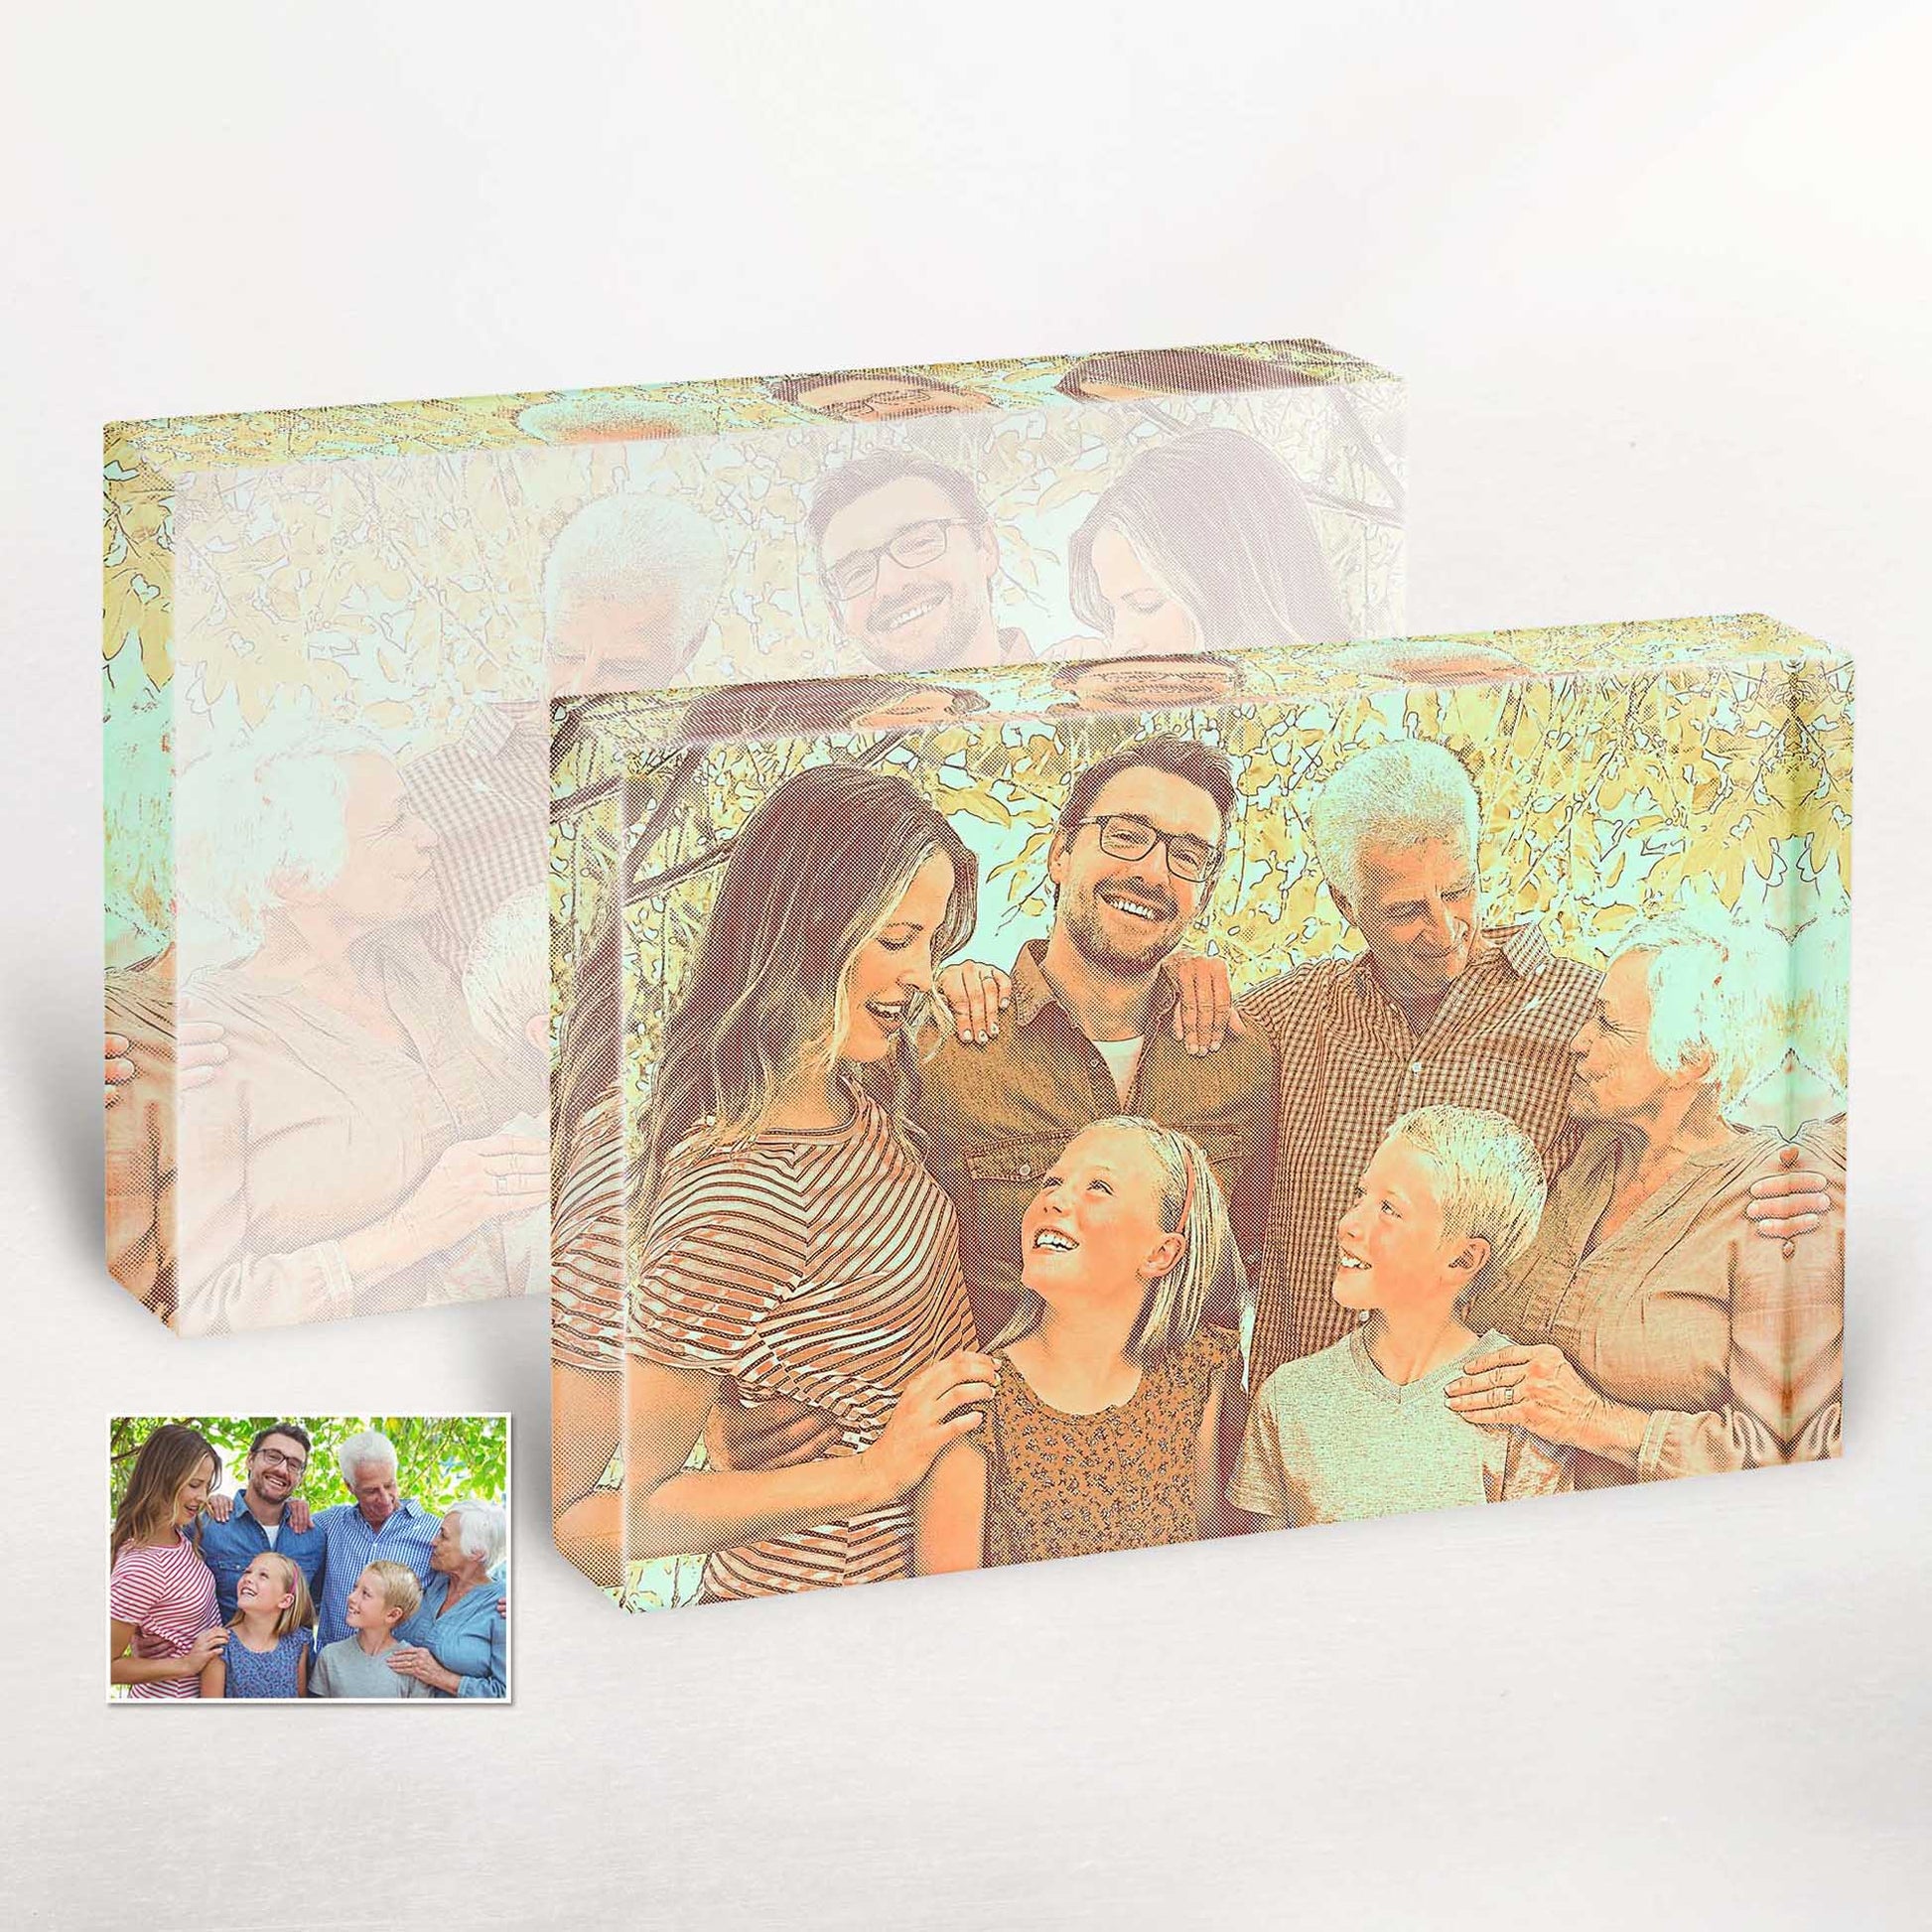 Infuse your home with energy and creativity using our Personalised Orange and Green Tones Acrylic Block Photo. Its exciting and cool design, resembling a fun and fresh natural look, is a unique addition